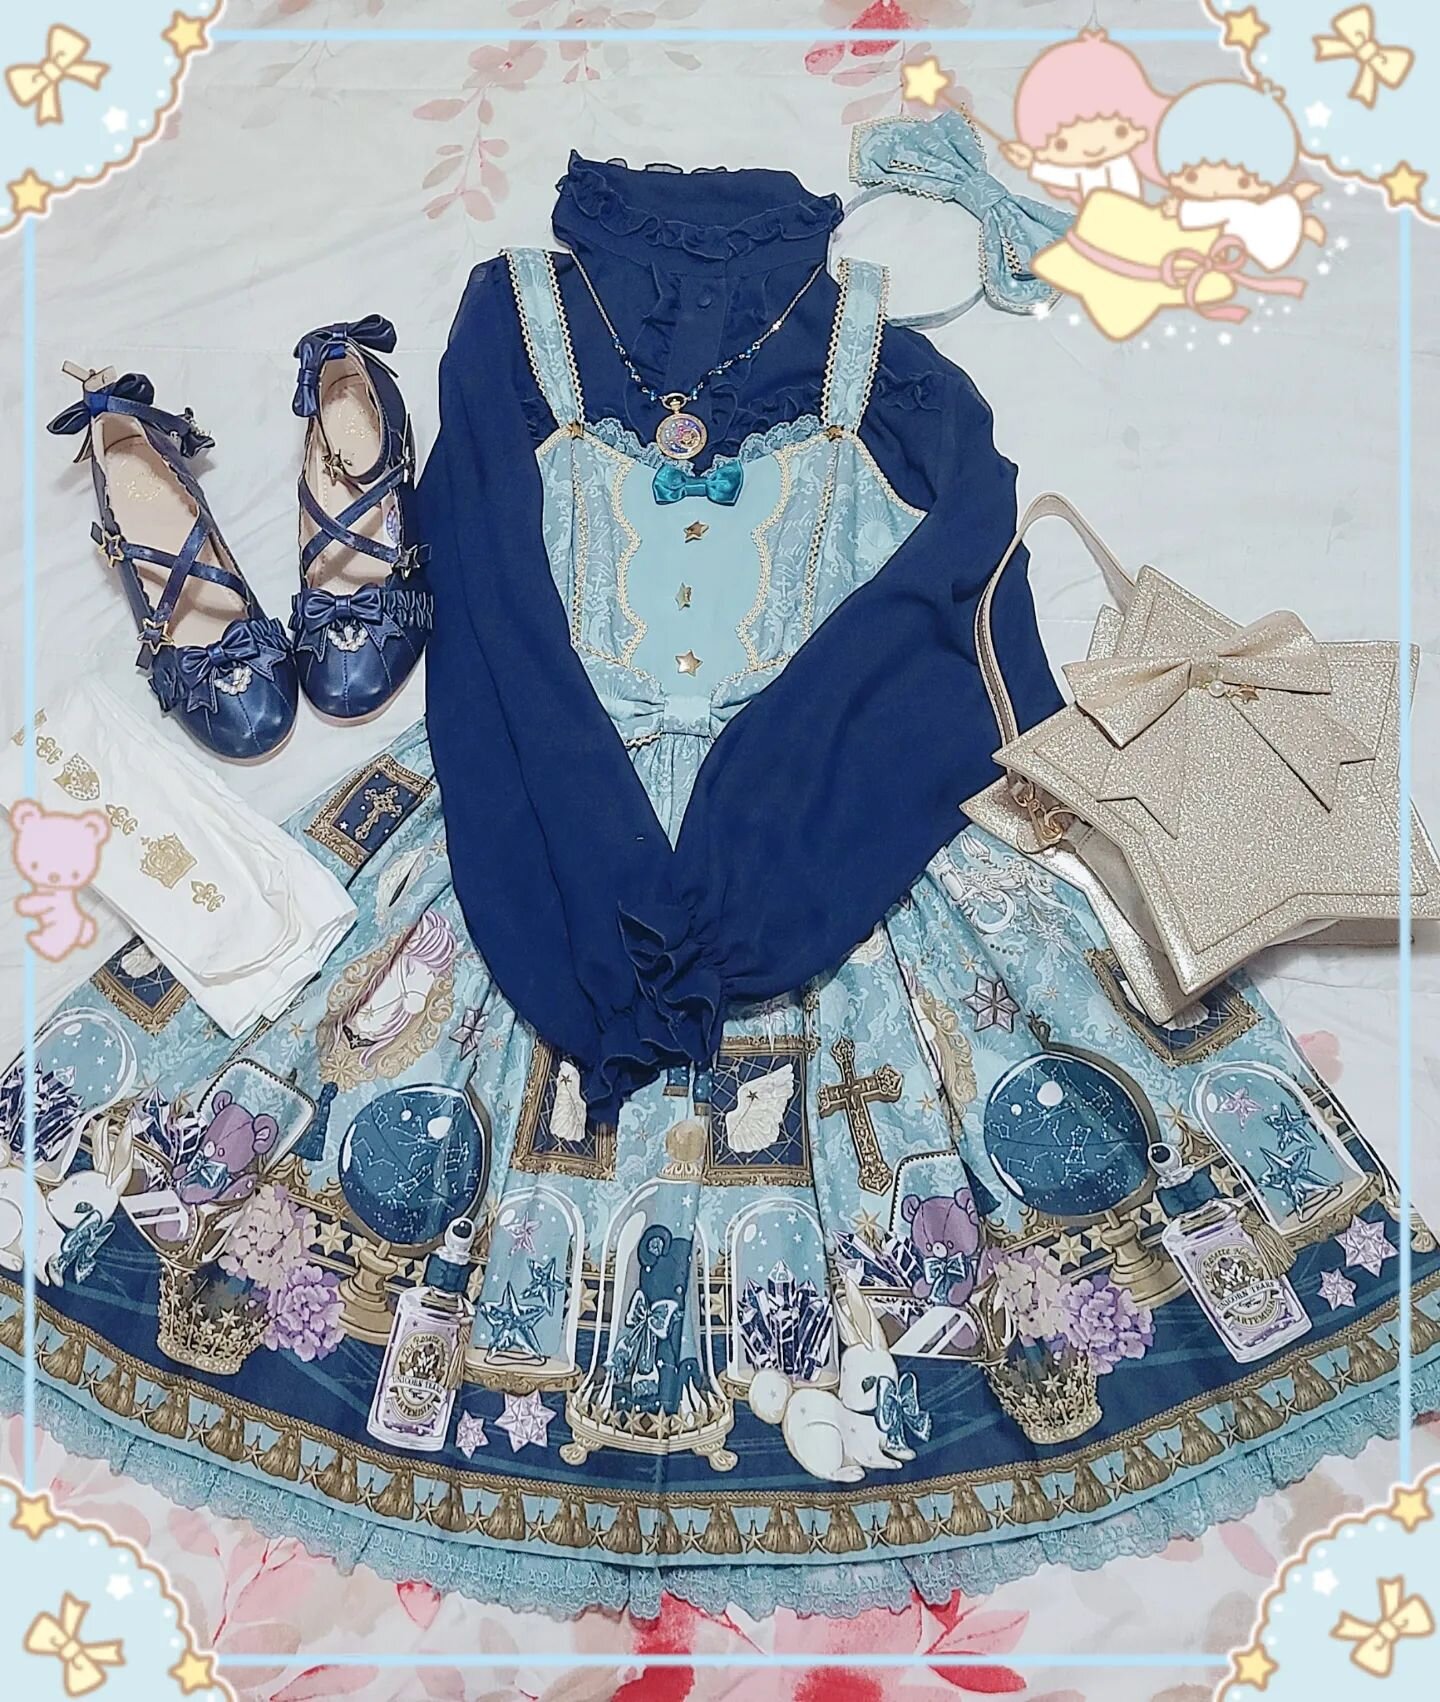 Haven't made a flat lay in years, but I also haven't had much energy to take proper coord photos these days so here we are 🥲

I absolutely adore the details on Mercator Antique Shop.

&nbsp;⠀⠀⠀⠀⠀⠀⠀⠀⠀⠀⠀
&nbsp;⠀⠀⠀⠀⠀⠀⠀⠀⠀⠀⠀
&nbsp;⠀⠀⠀⠀⠀⠀⠀⠀⠀⠀⠀
___________